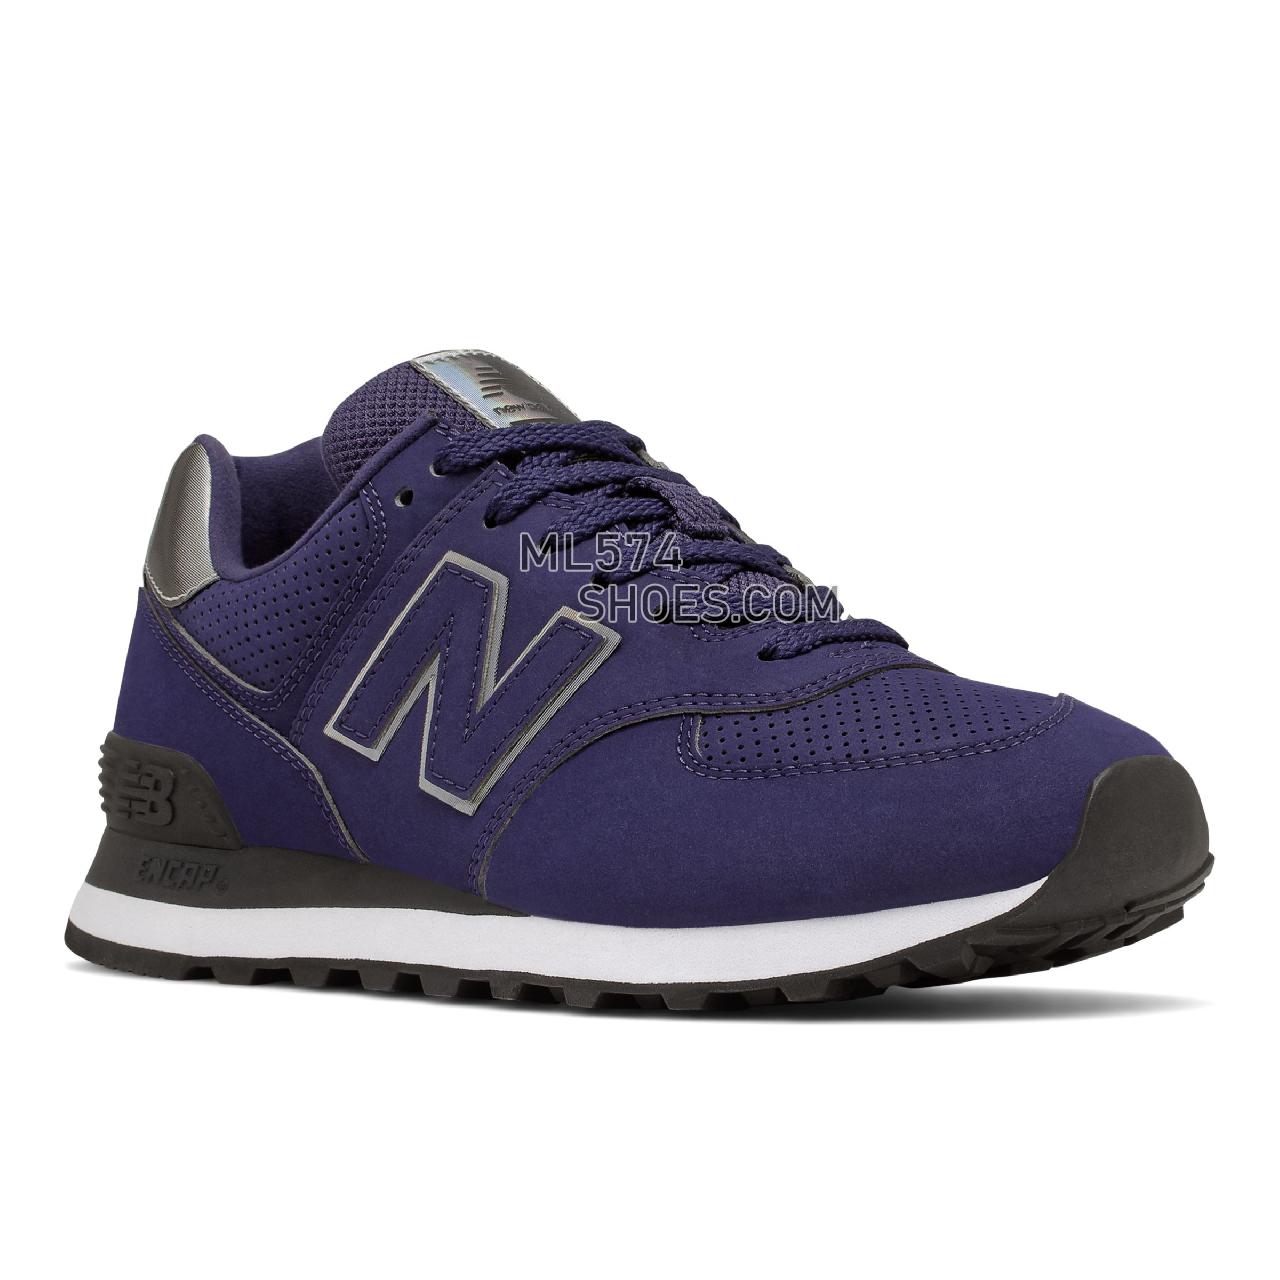 New Balance 574 - Women's Classic Sneakers - Night Tide with Black - WL574DG2